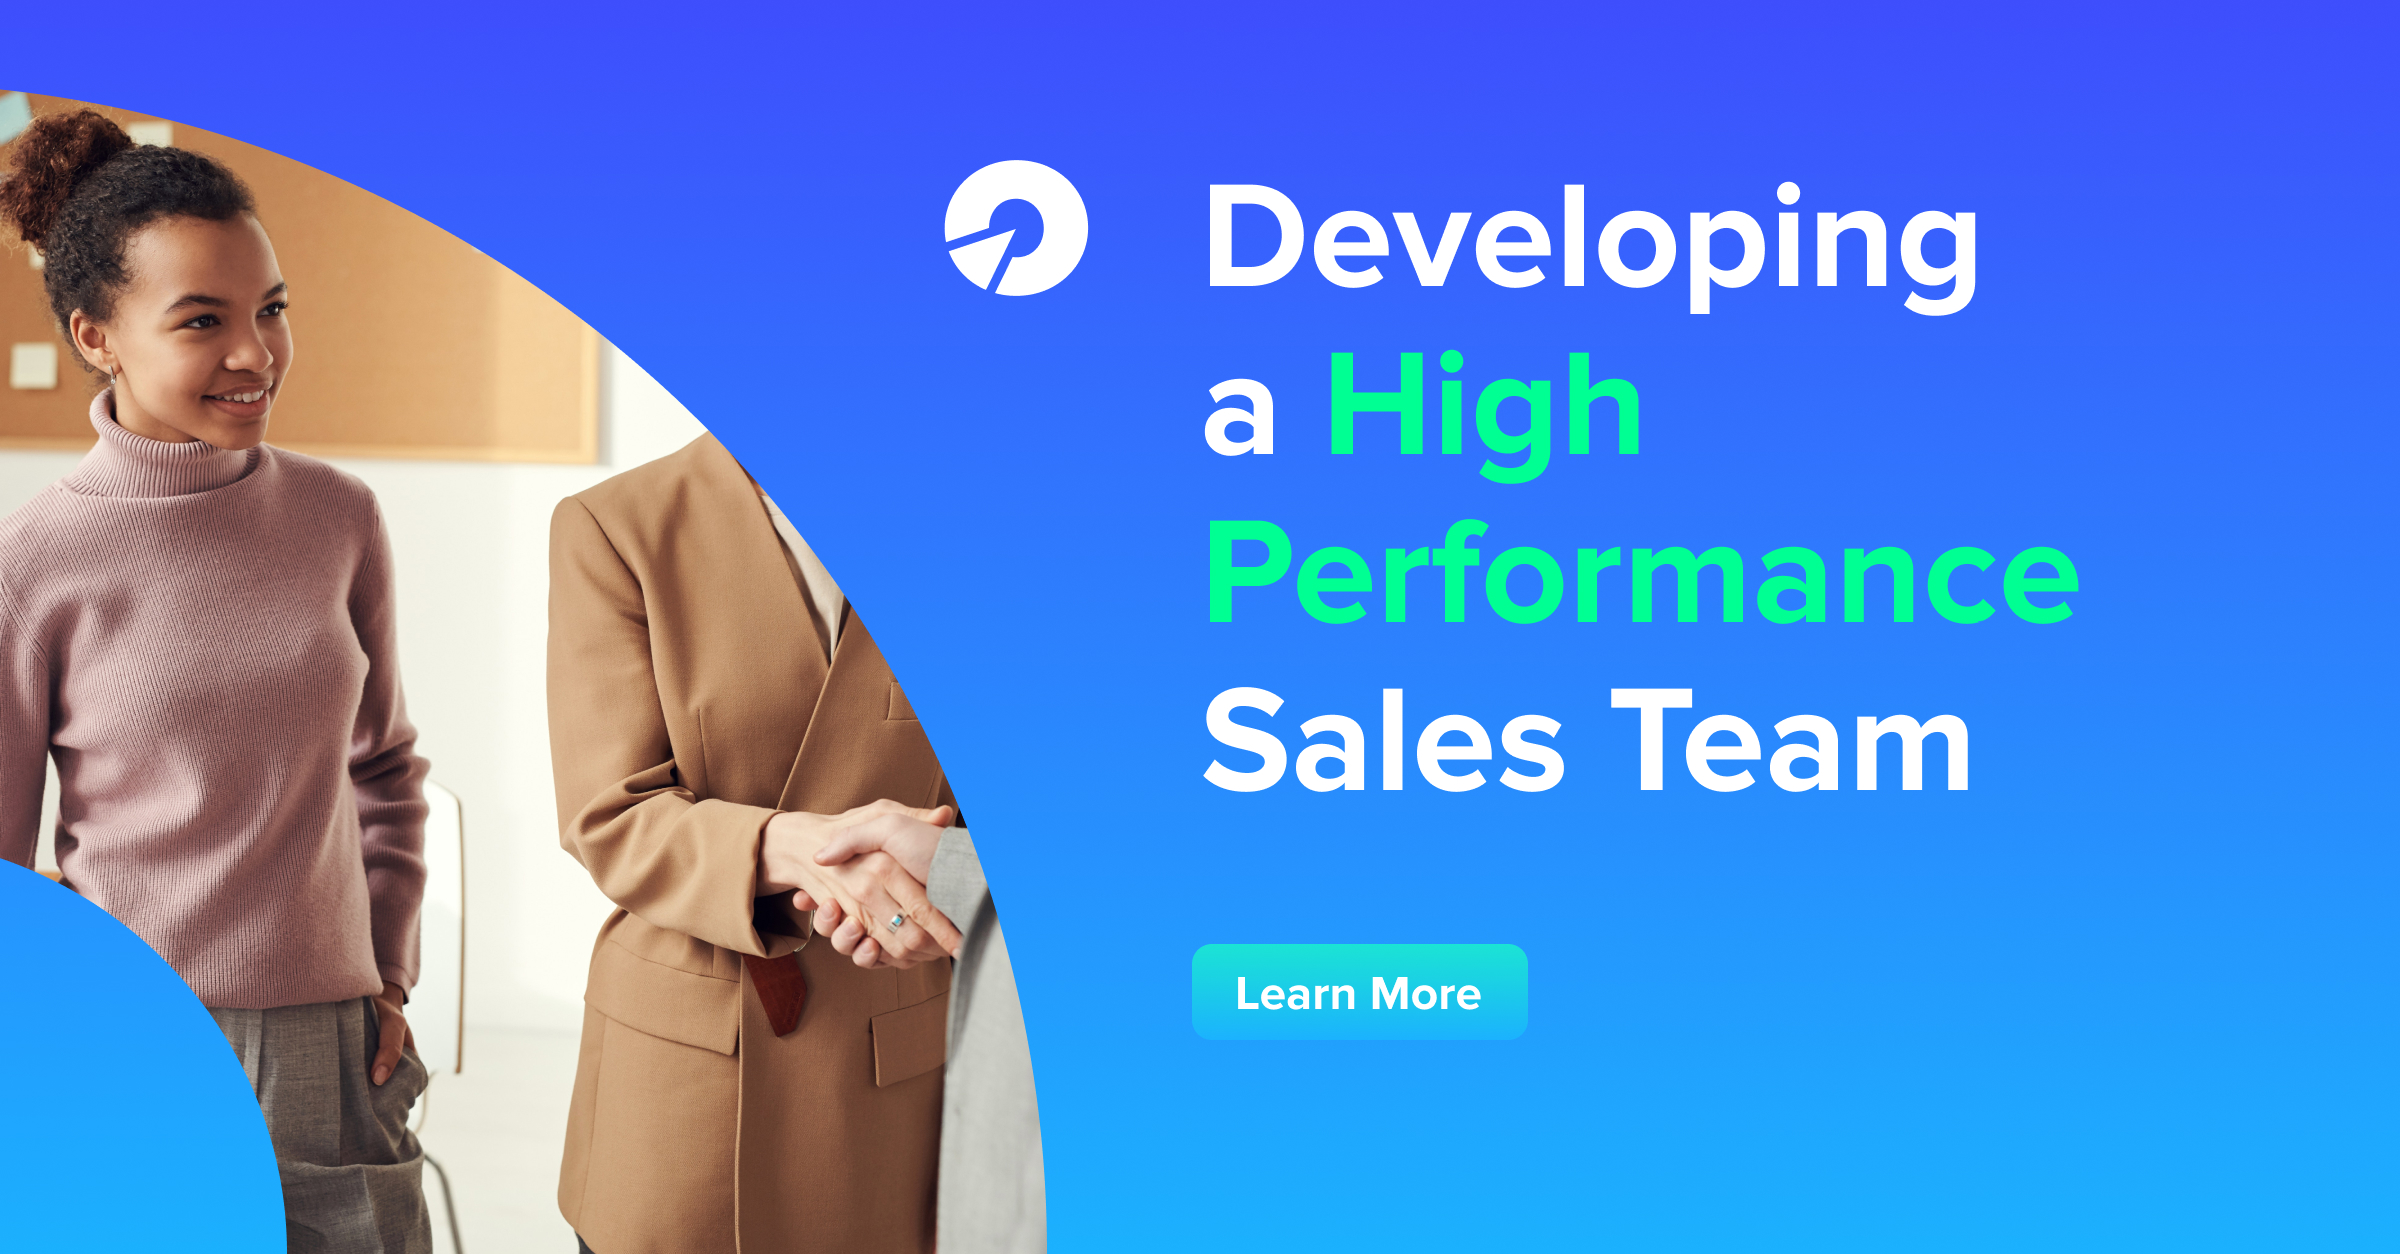 Developing a High-Performance Sales Team